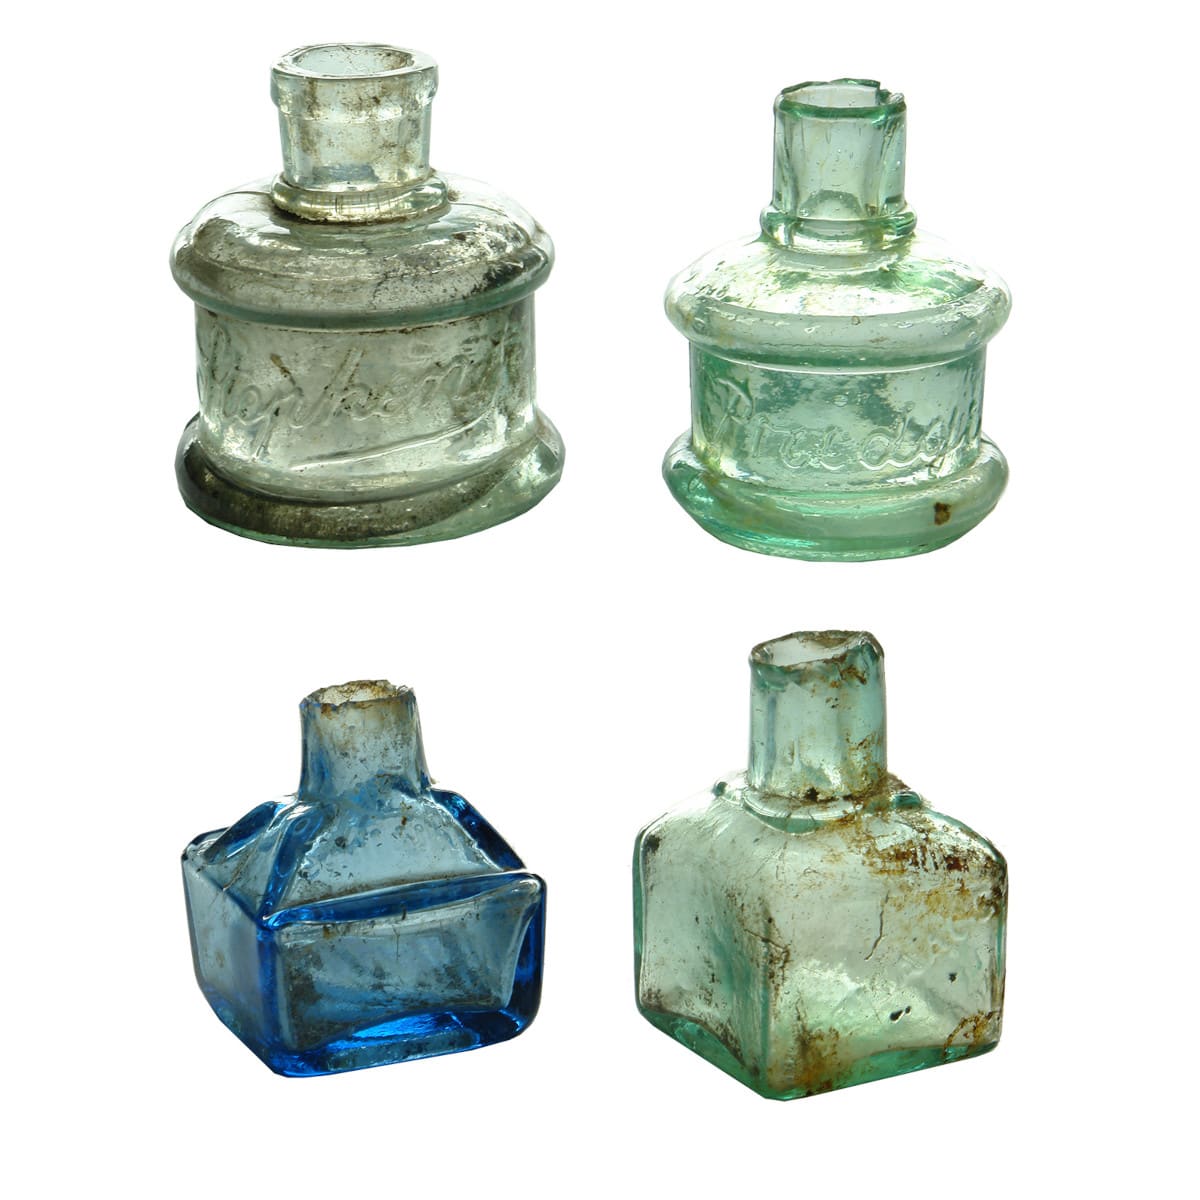 Four small Inks: Stephens; Pridge; Simpson's (Blue square boat shape); S. E. Isaacs, Exchange Ink.